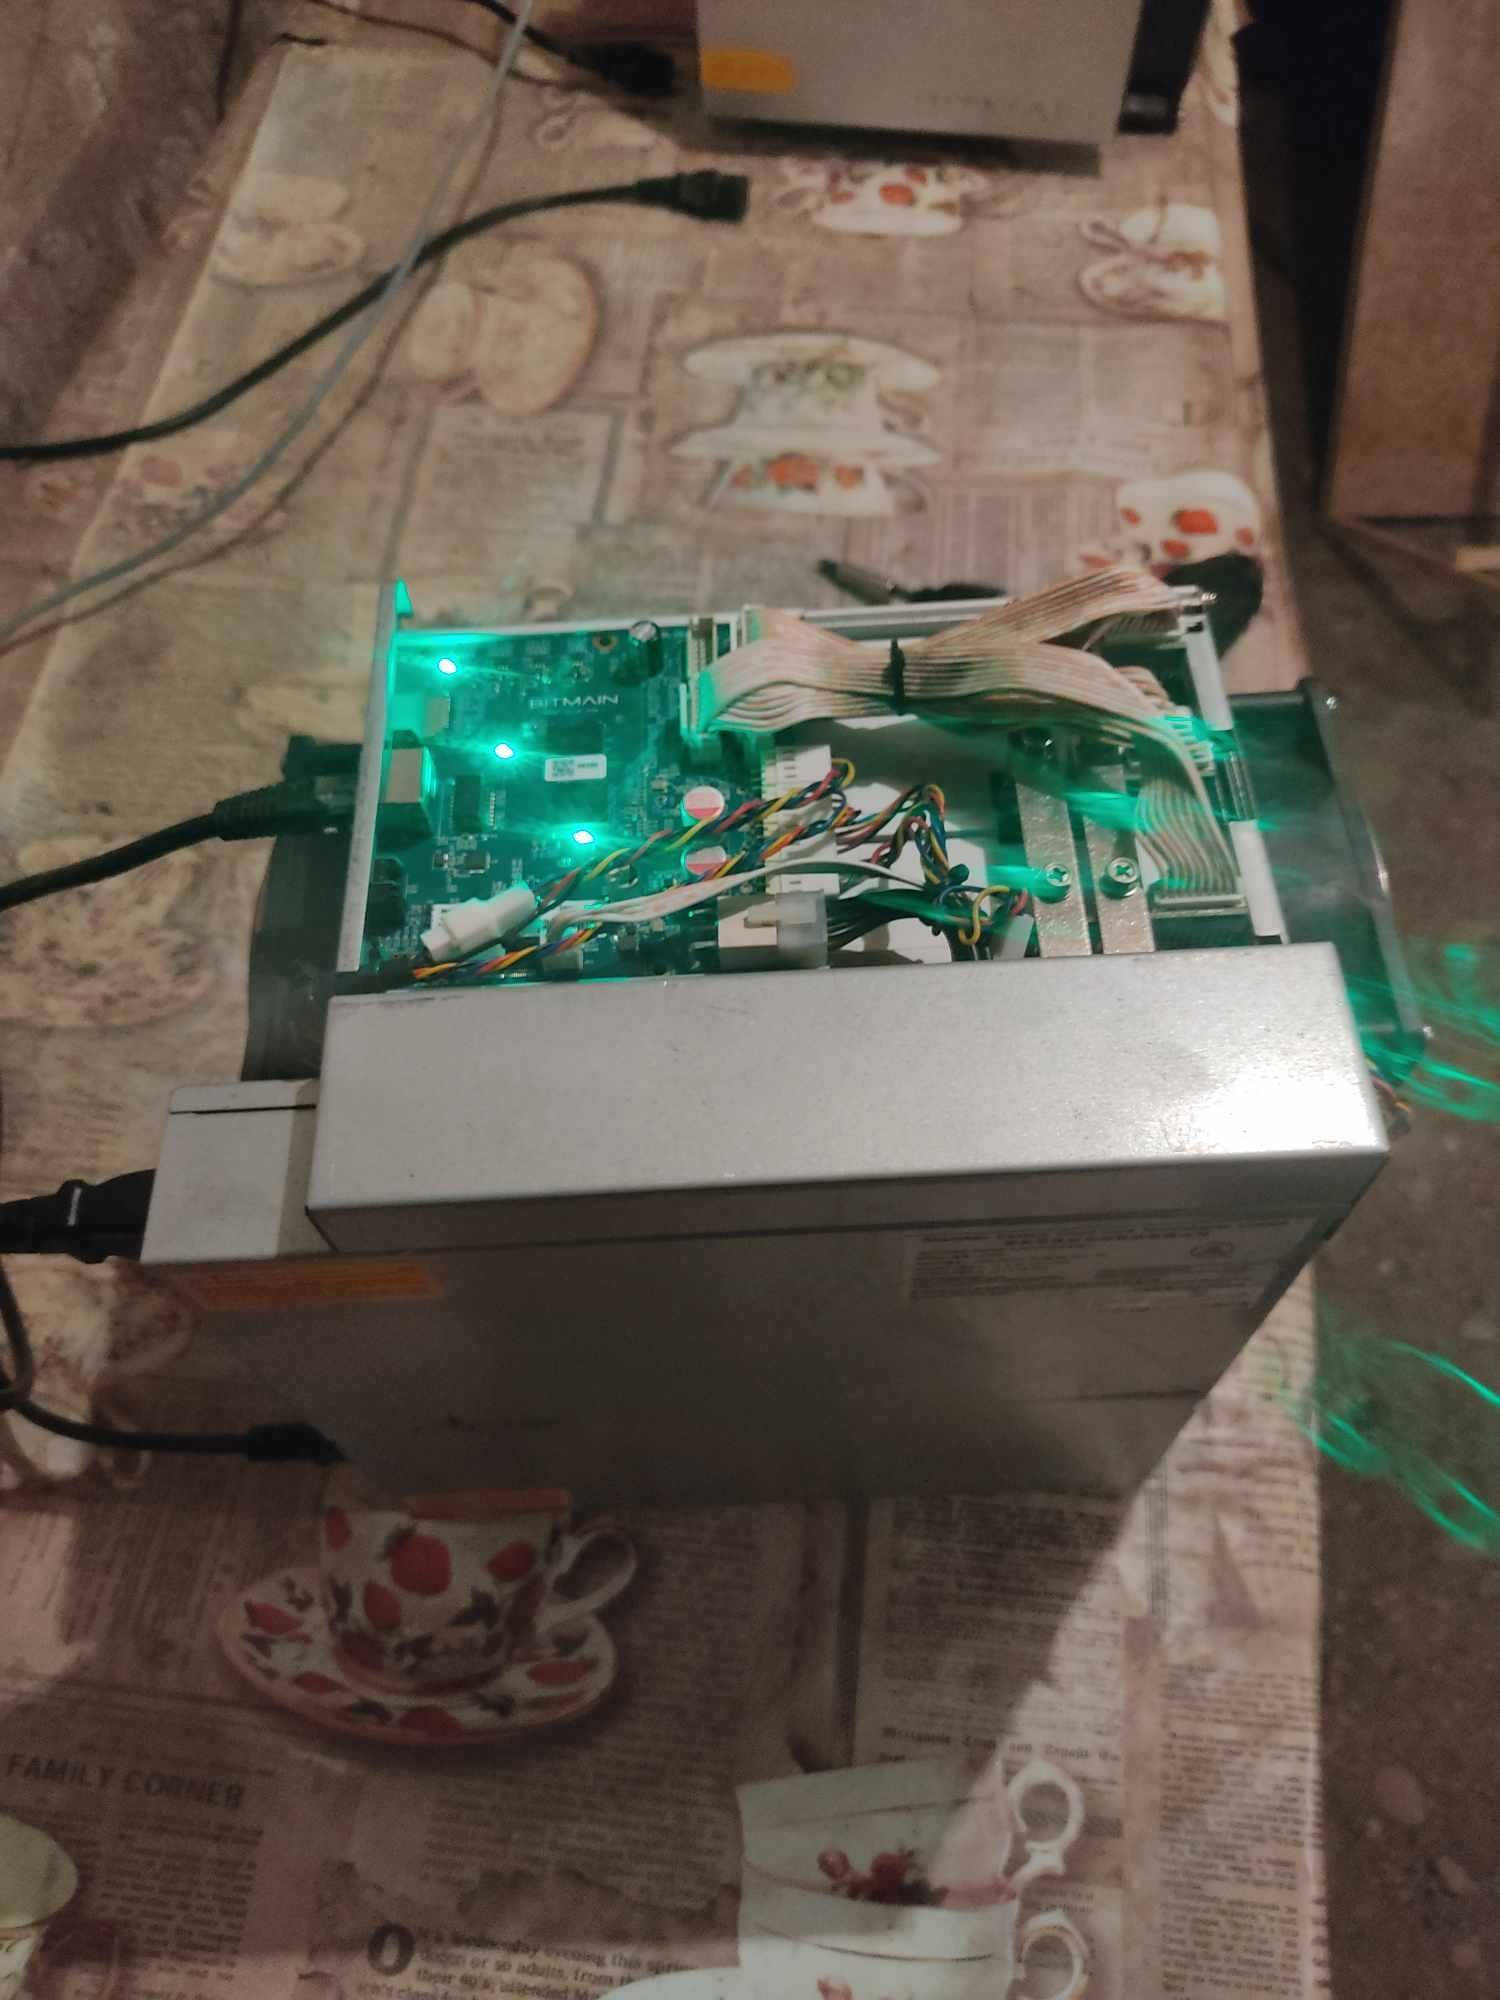 AntMiner T17+ 58Th